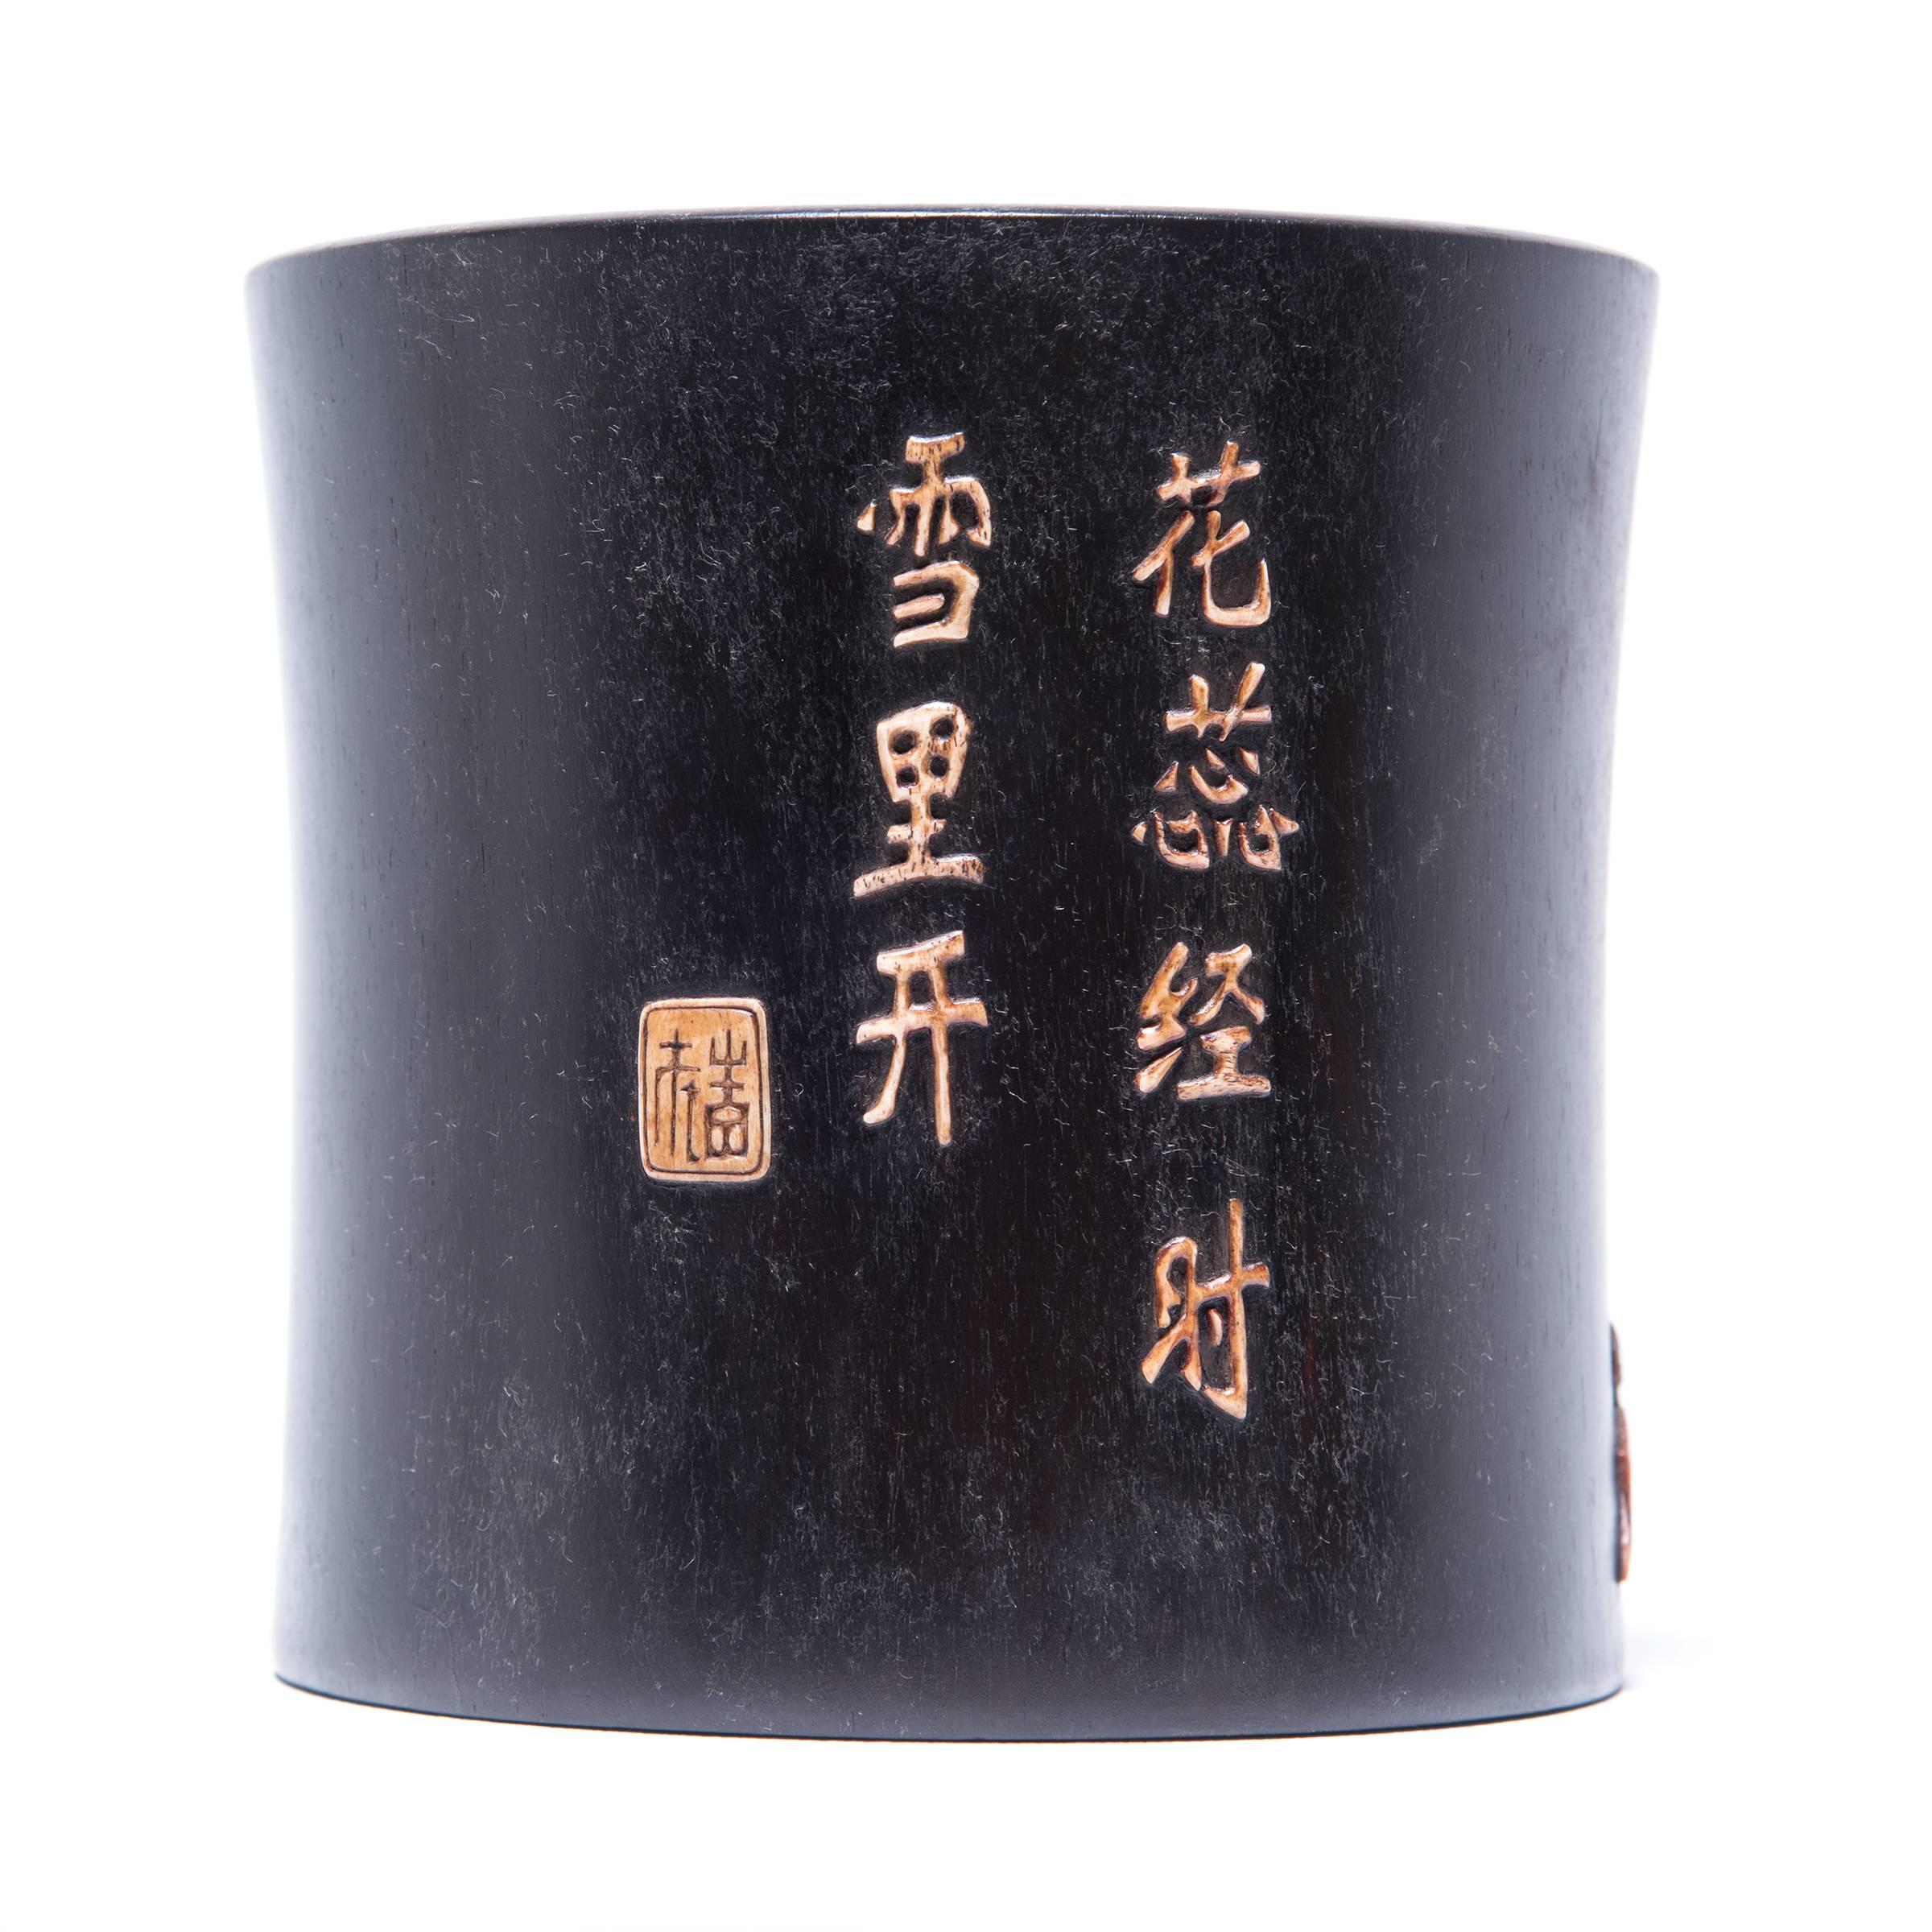 A brush pot or bitong, such as this one, was often found among a scholar’s brushes, inkpot, and inkstone. This beautiful example is carved from zitan, a highly prized rare and slow-growing hardwood. Mother-of-pearl and soapstone inlays embellish the